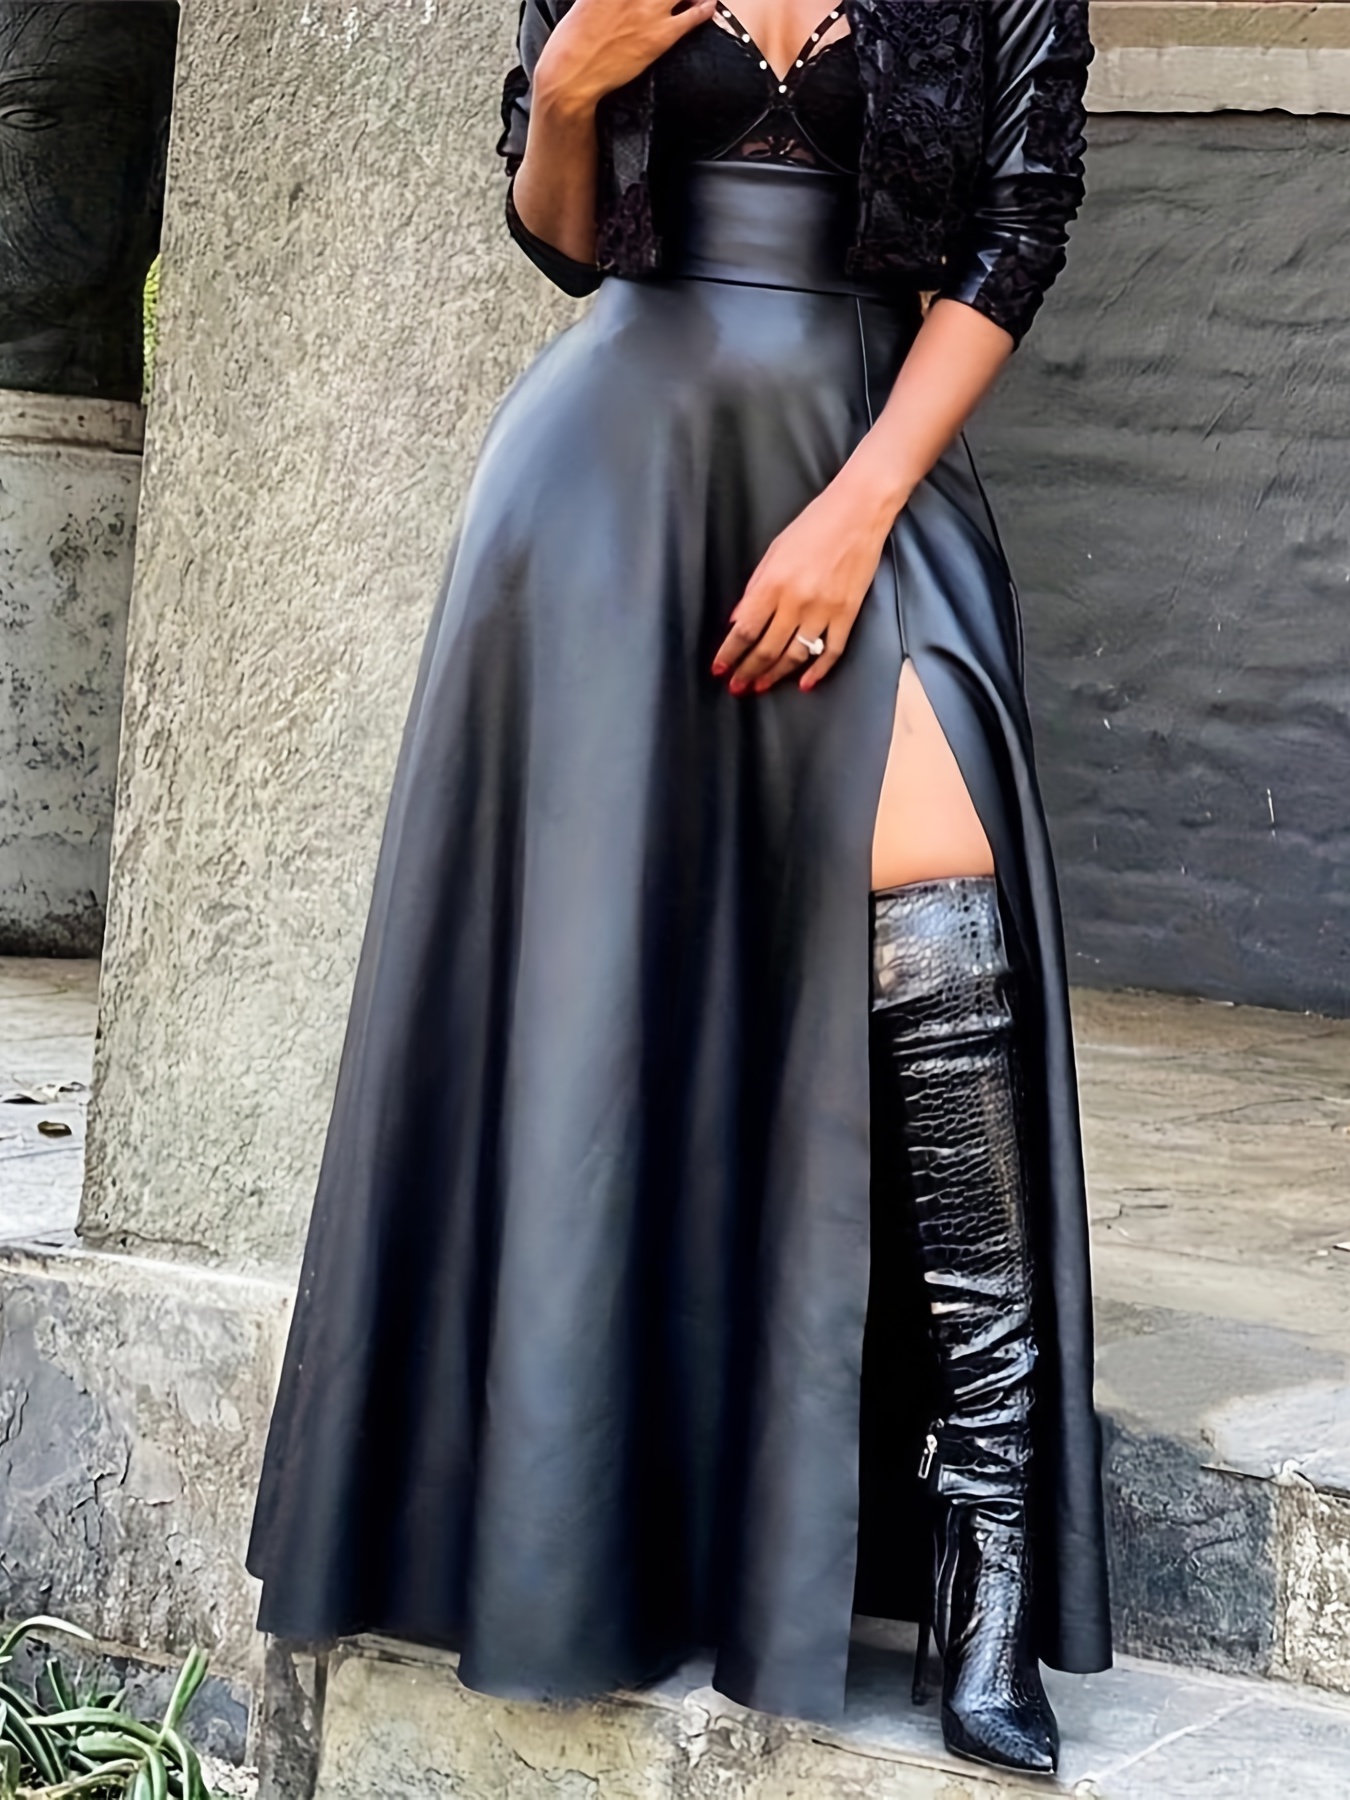 Women's High Waist PU Leather Skirt with Sexy Side Slit